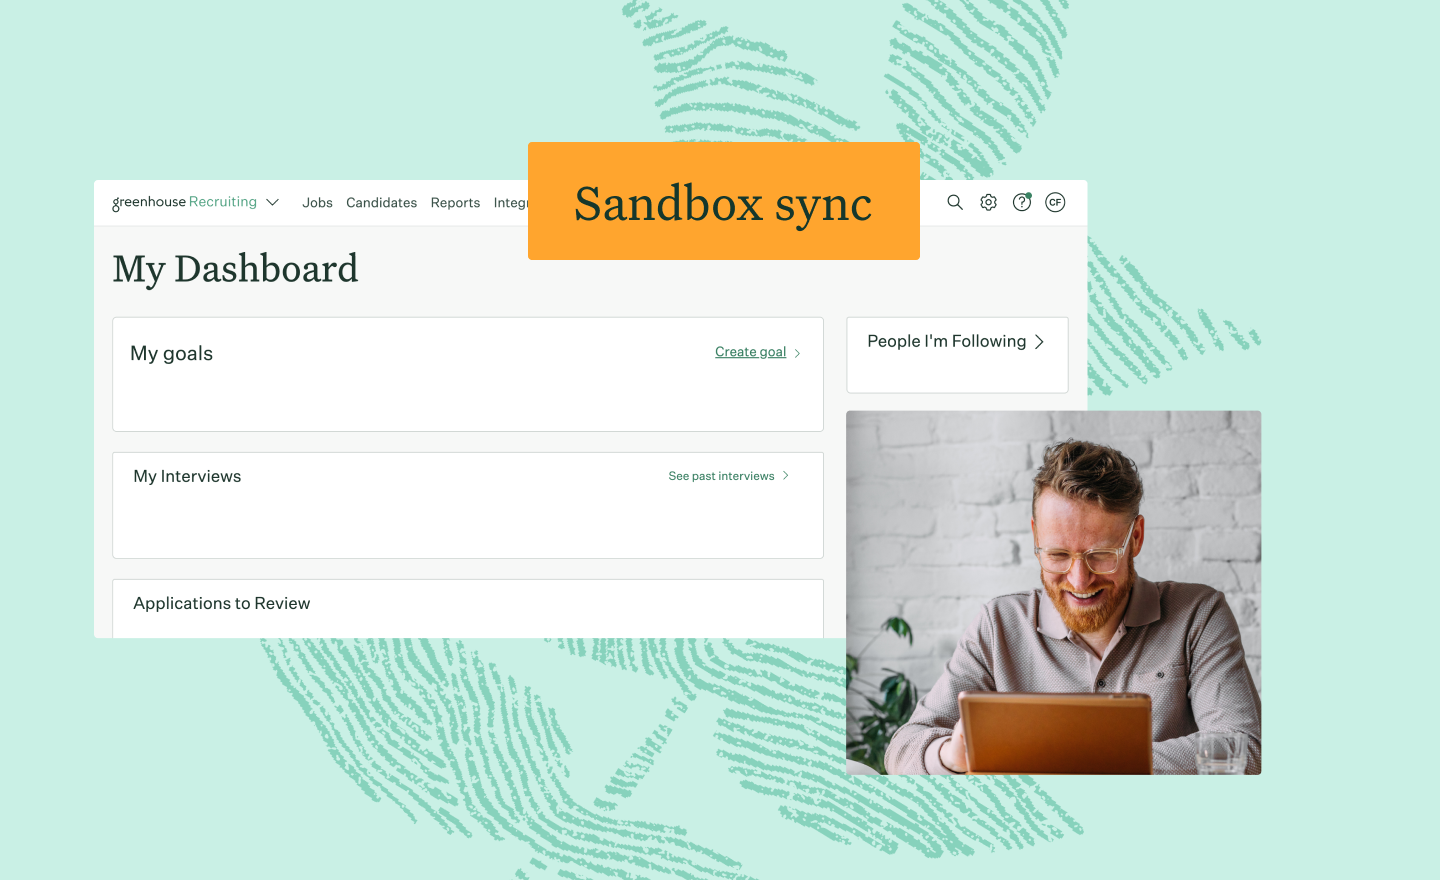 A man with glasses is shown smiling at his computer screen below a graphic of a fingerprint leaf with the words Sandbox sync